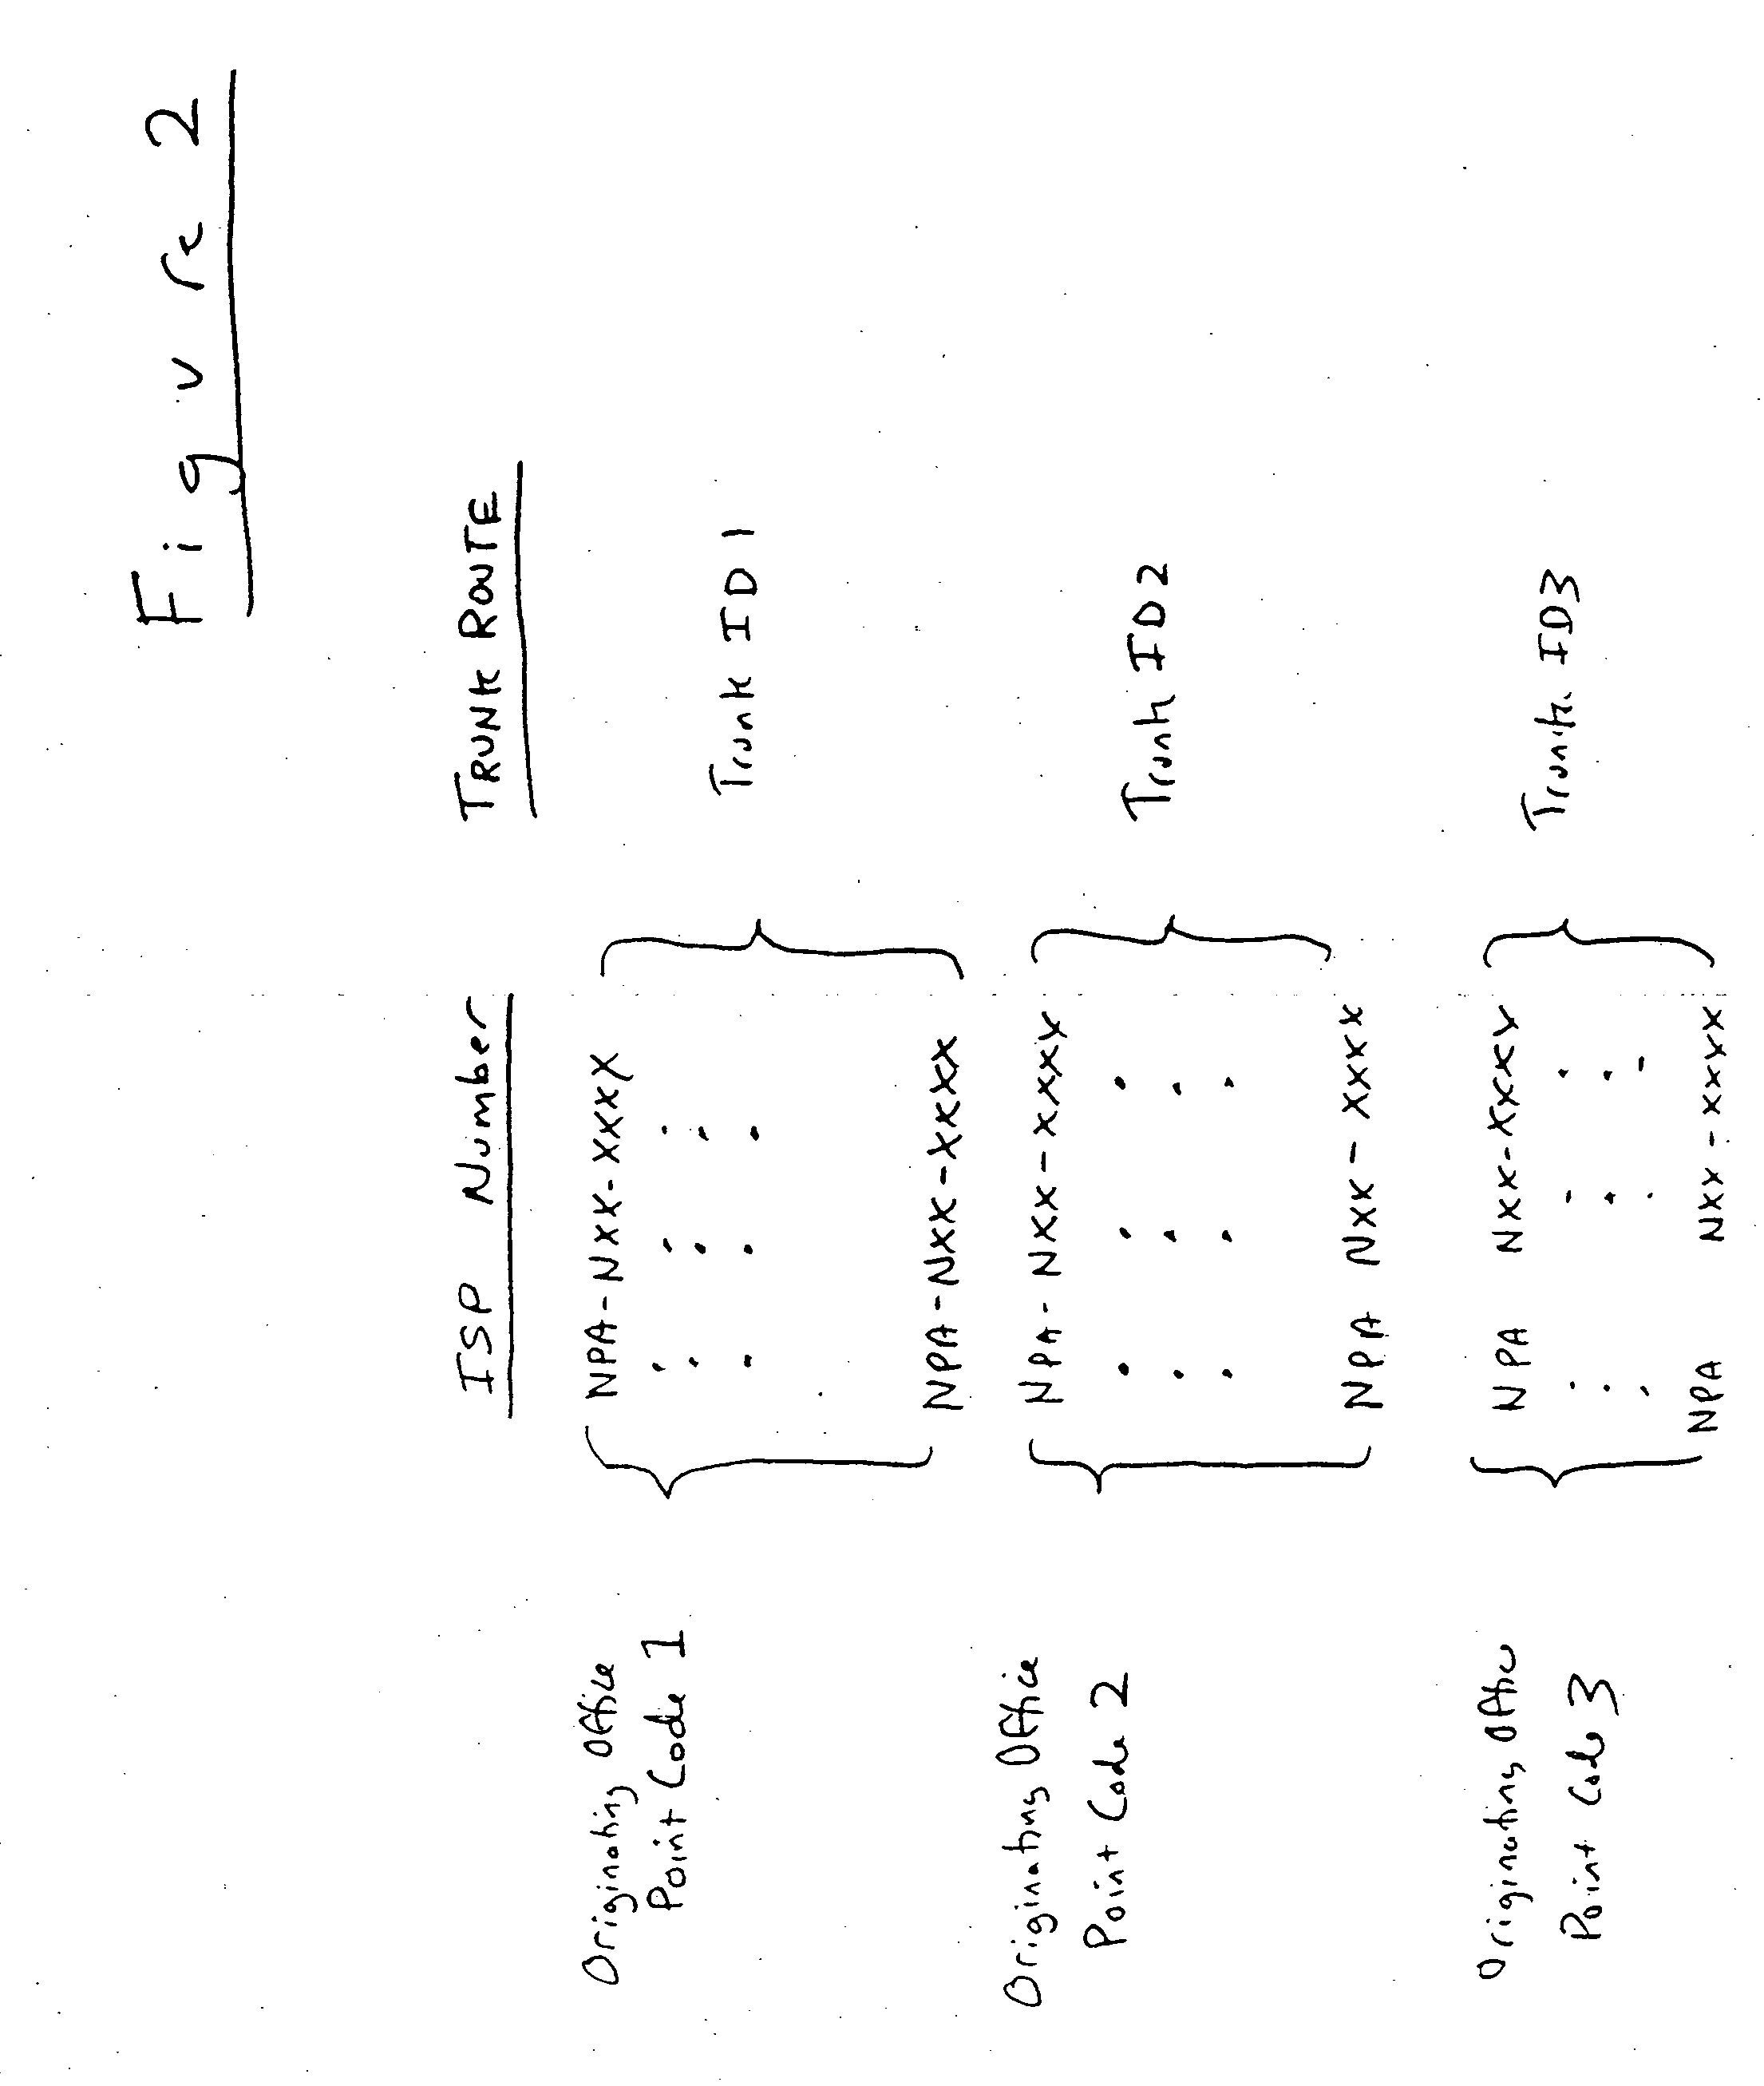 Trunk and switch architecture for providing switched-circuit connections to on-line data services